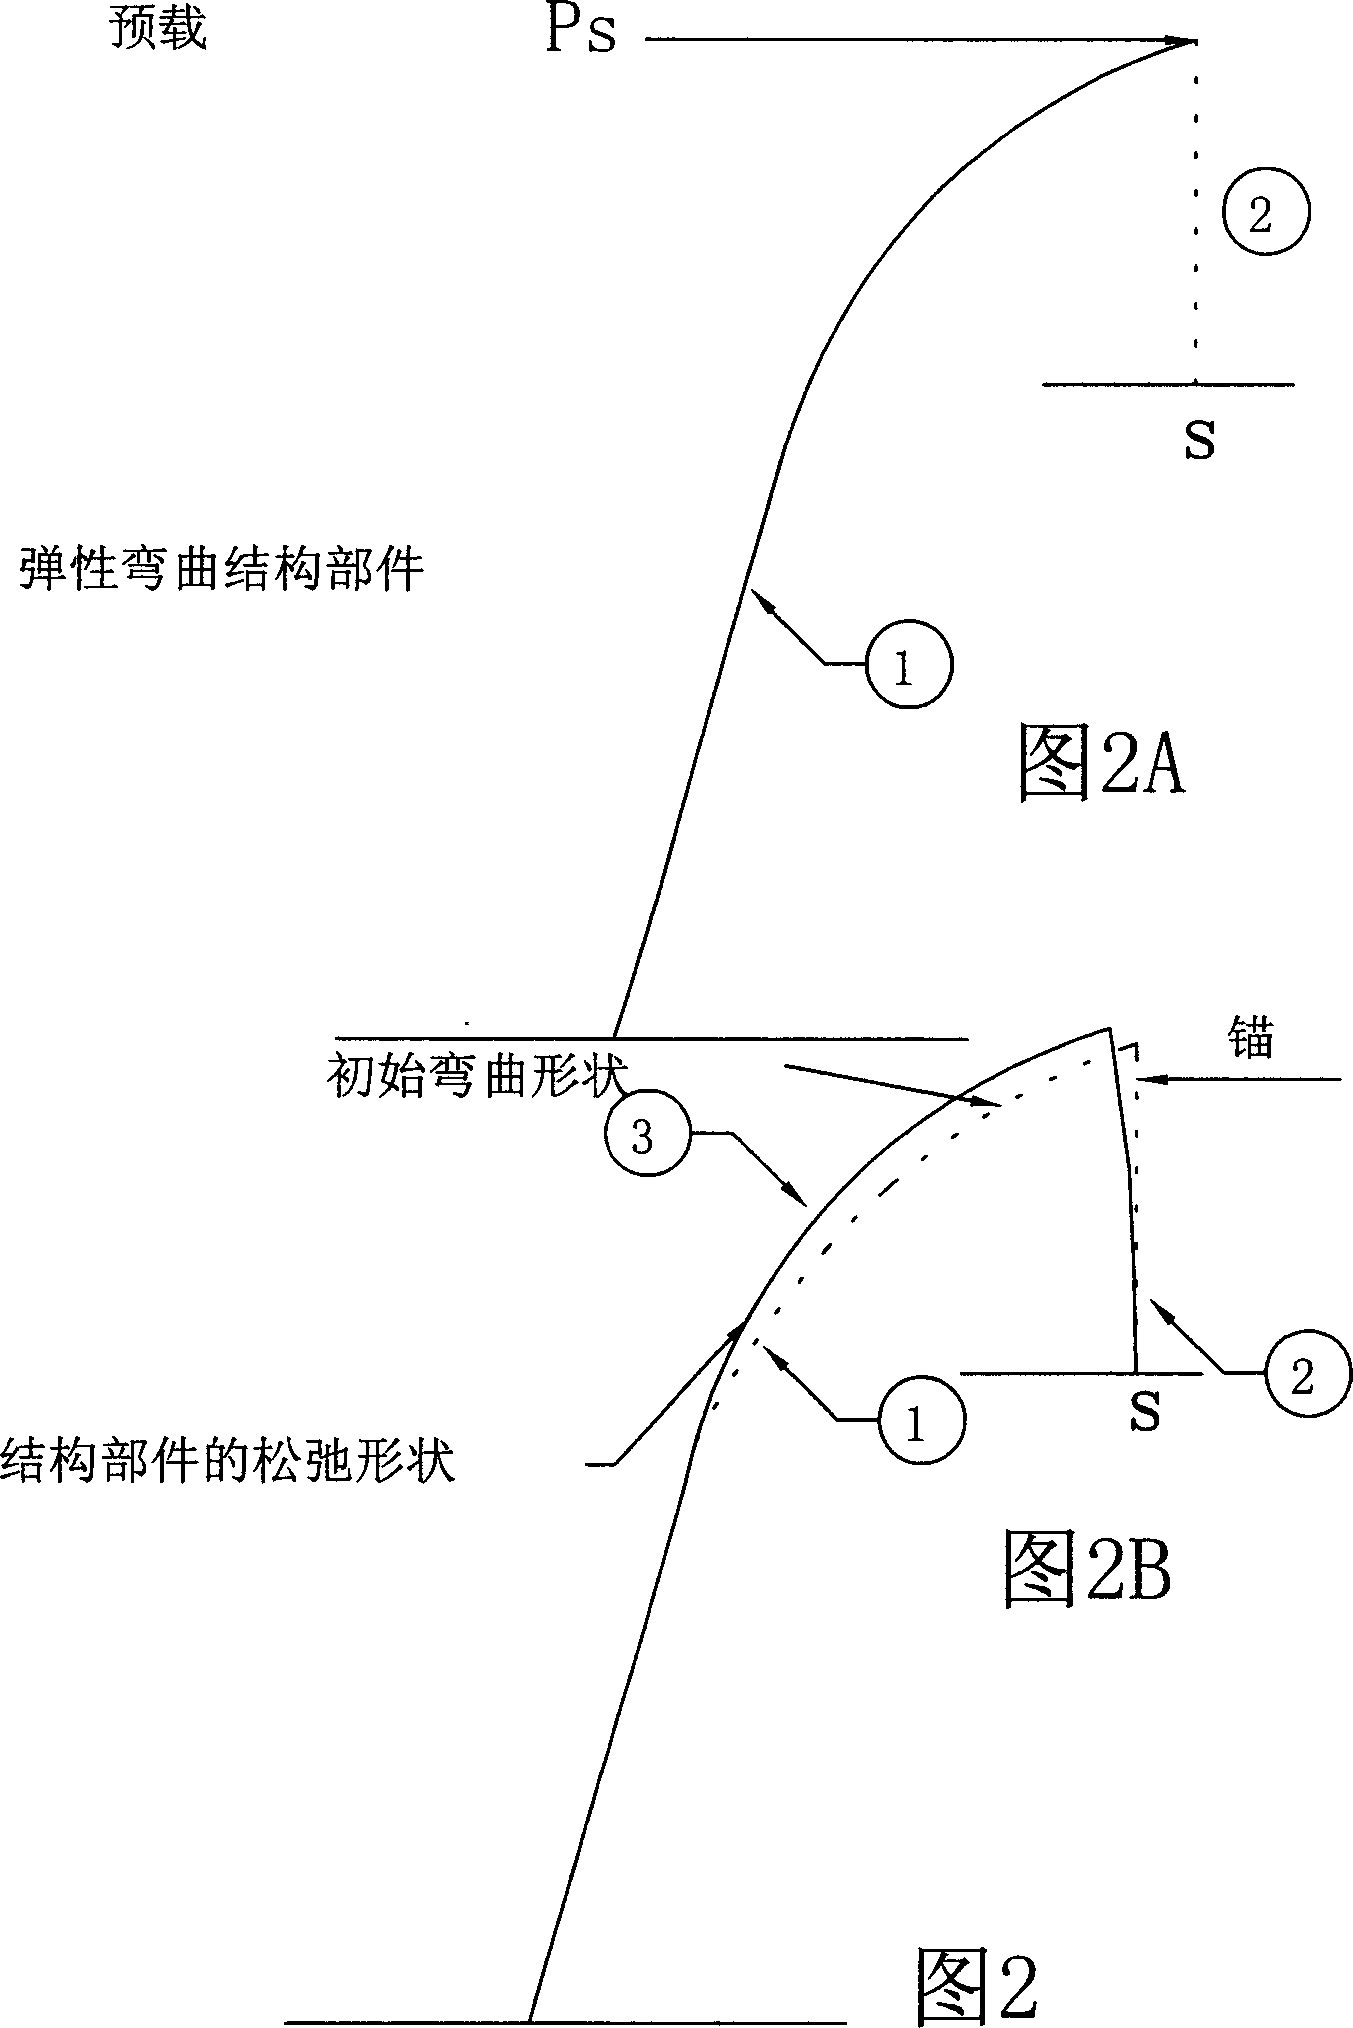 Preloaded parabolic dish antenna and method of making it